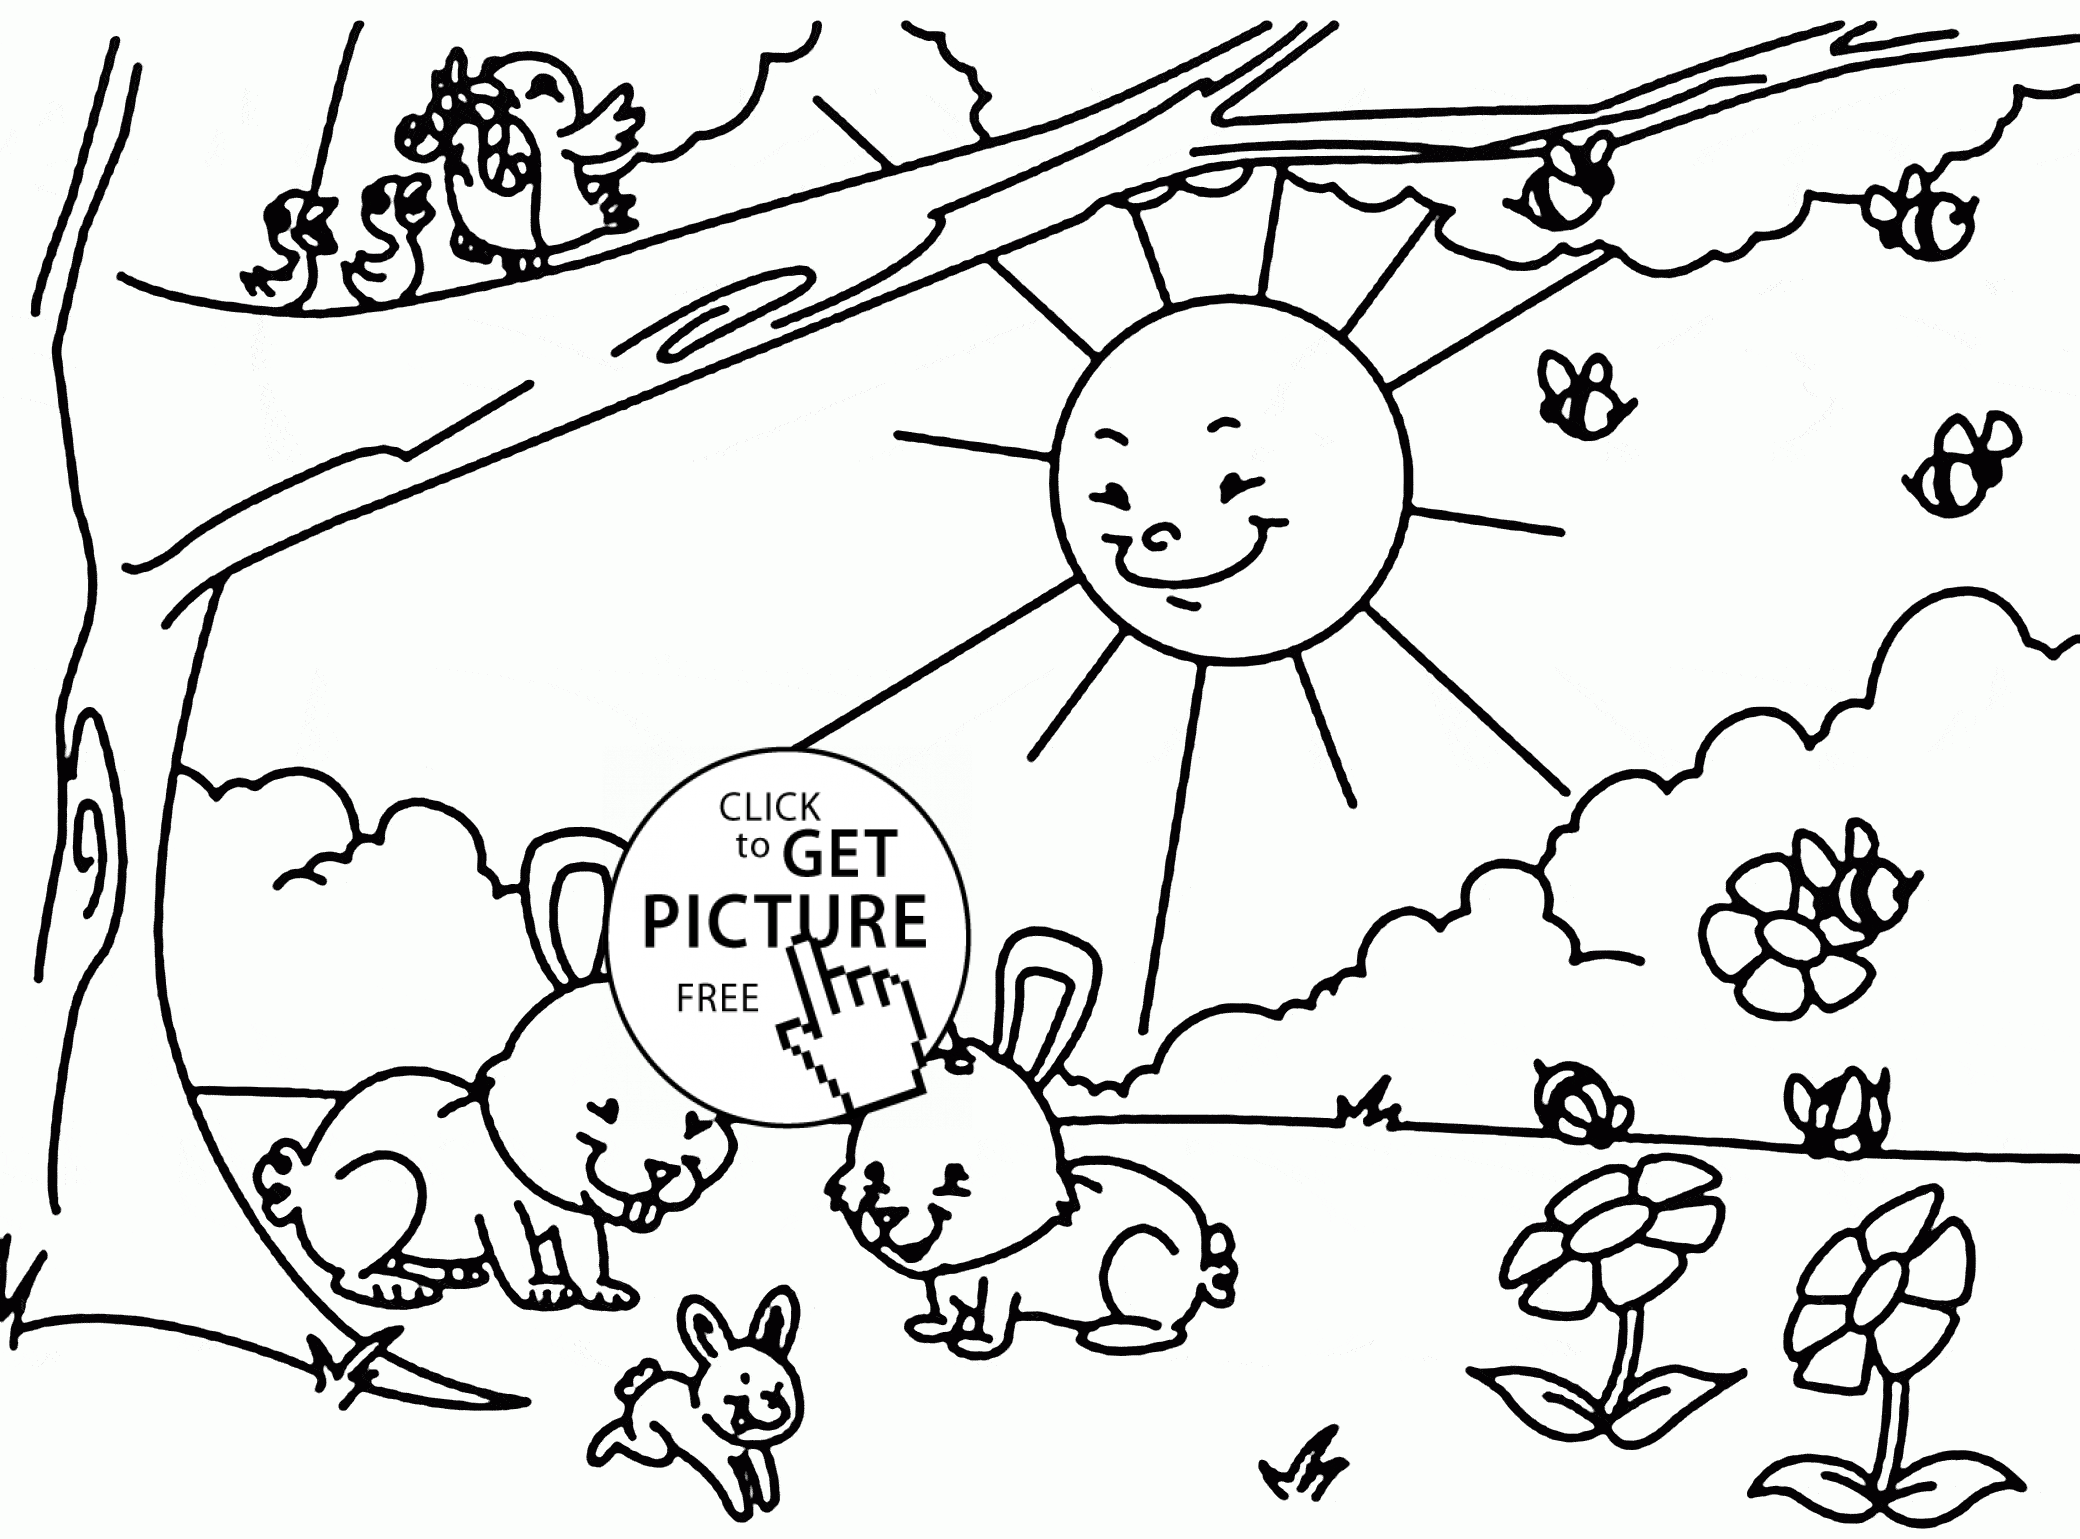 Happy Spring in Forest coloring page for kids, seasons coloring